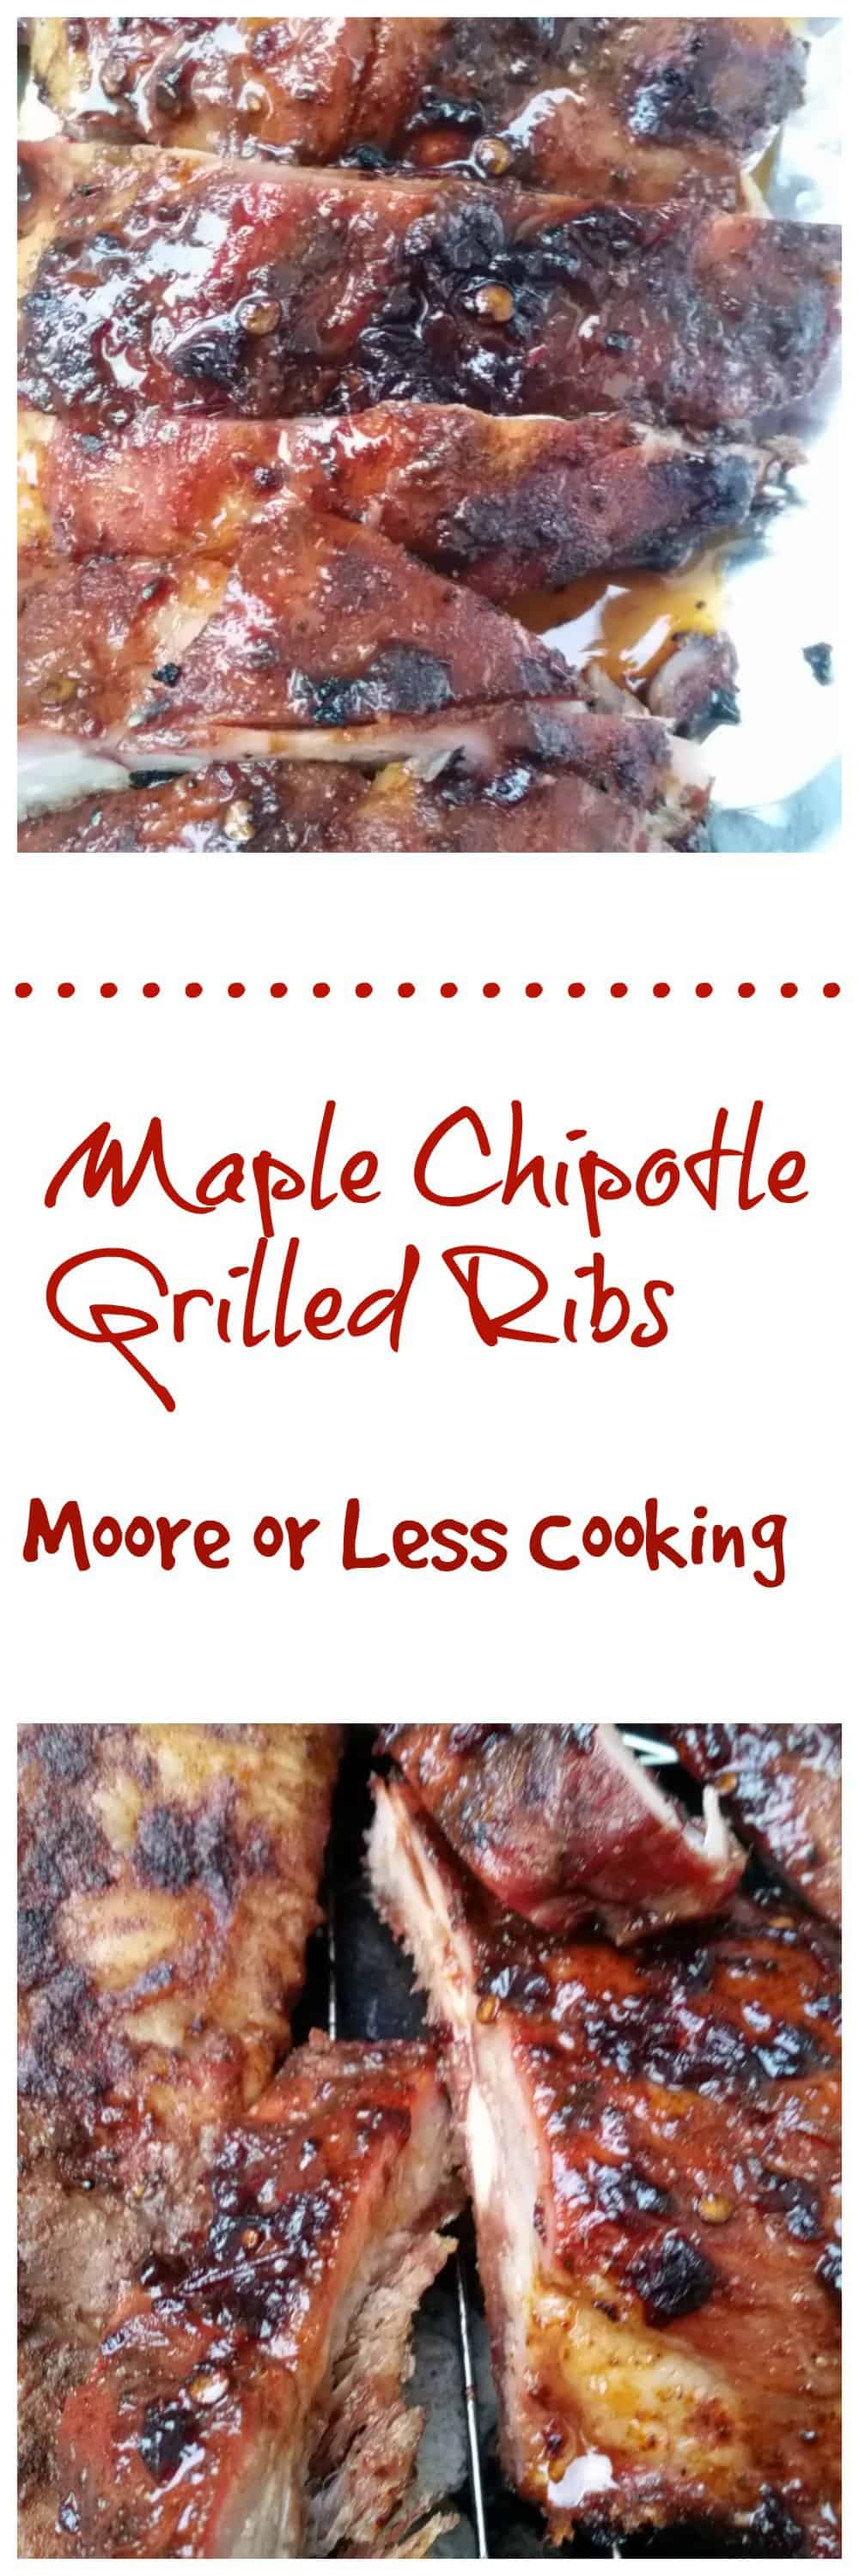 Maple Chipotle Grilled Ribs